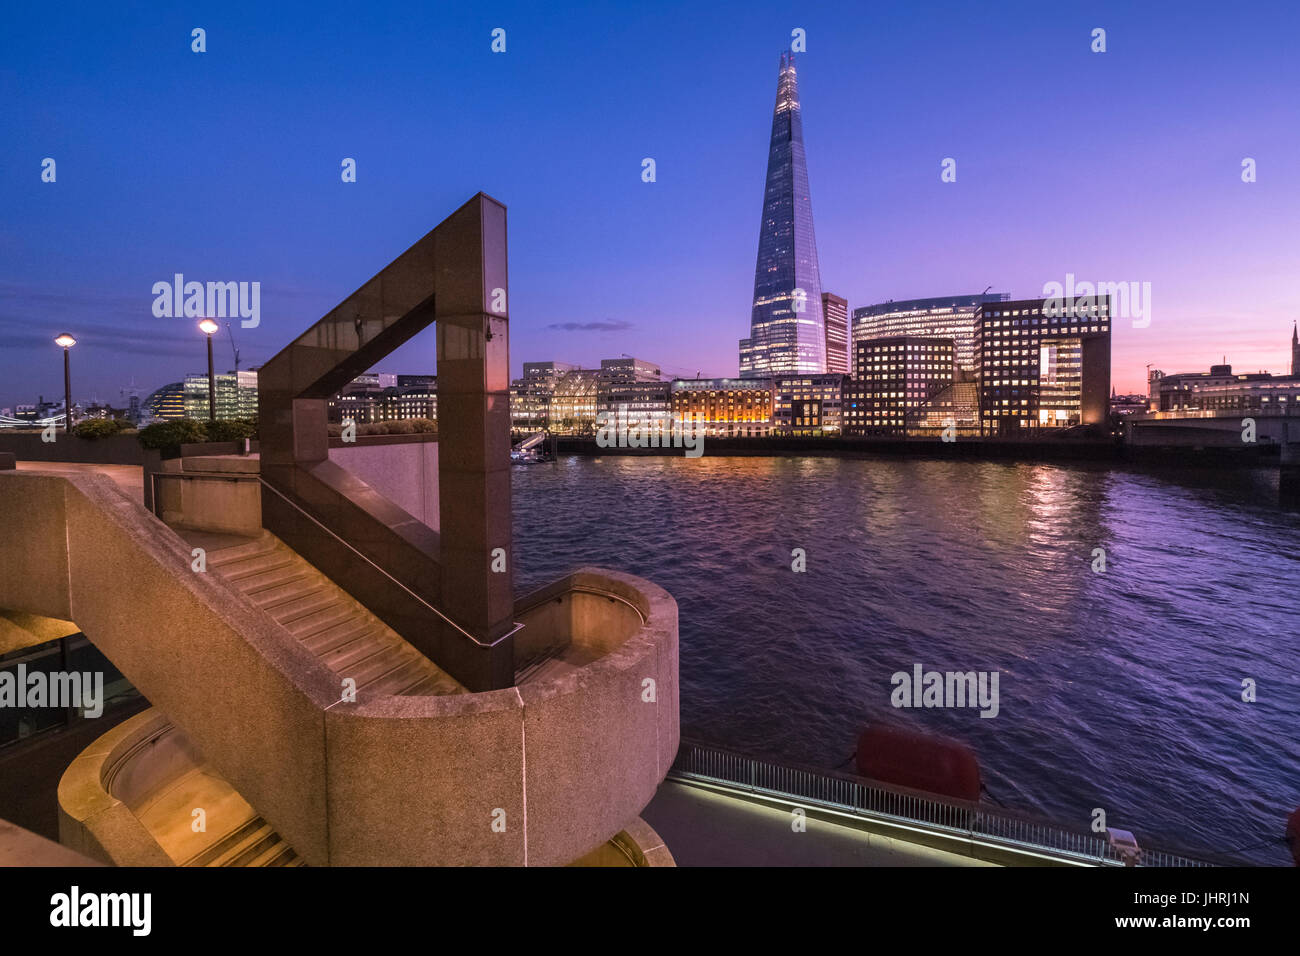 London skyline at sunset, featuring The Shard and 1 London Bridge buildings. Stock Photo